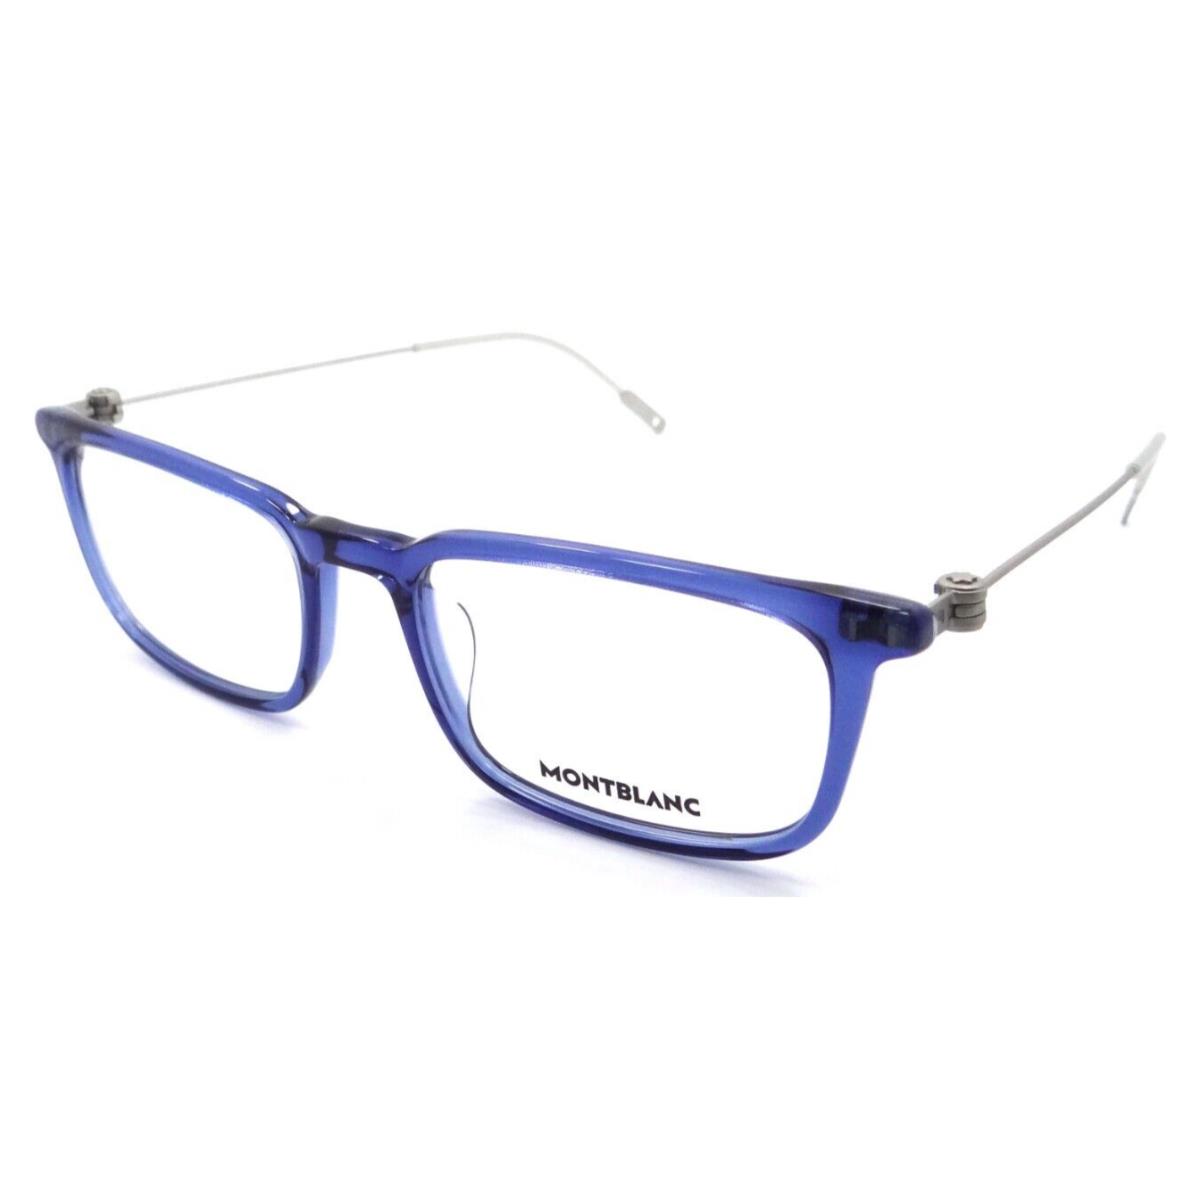 Montblanc Eyeglasses Frames MB0052O 004 53-19-145 Blue / Silver Made in Italy